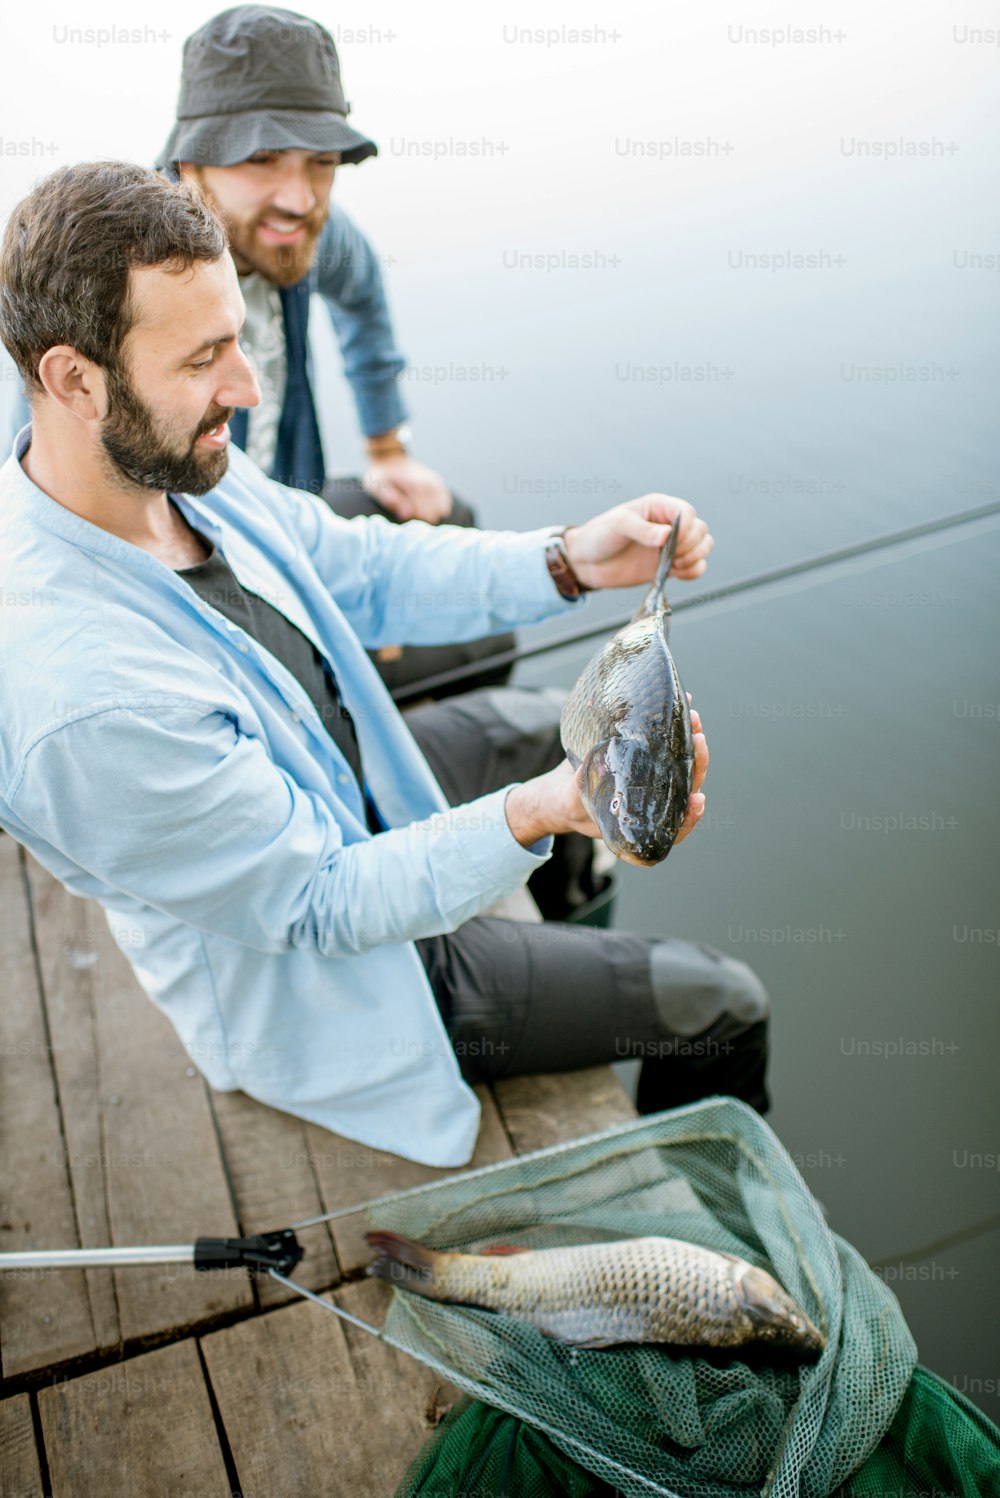 Two happy fishermen holding caught fish sitting on the wooden pier during the fishing on the lake at the morning